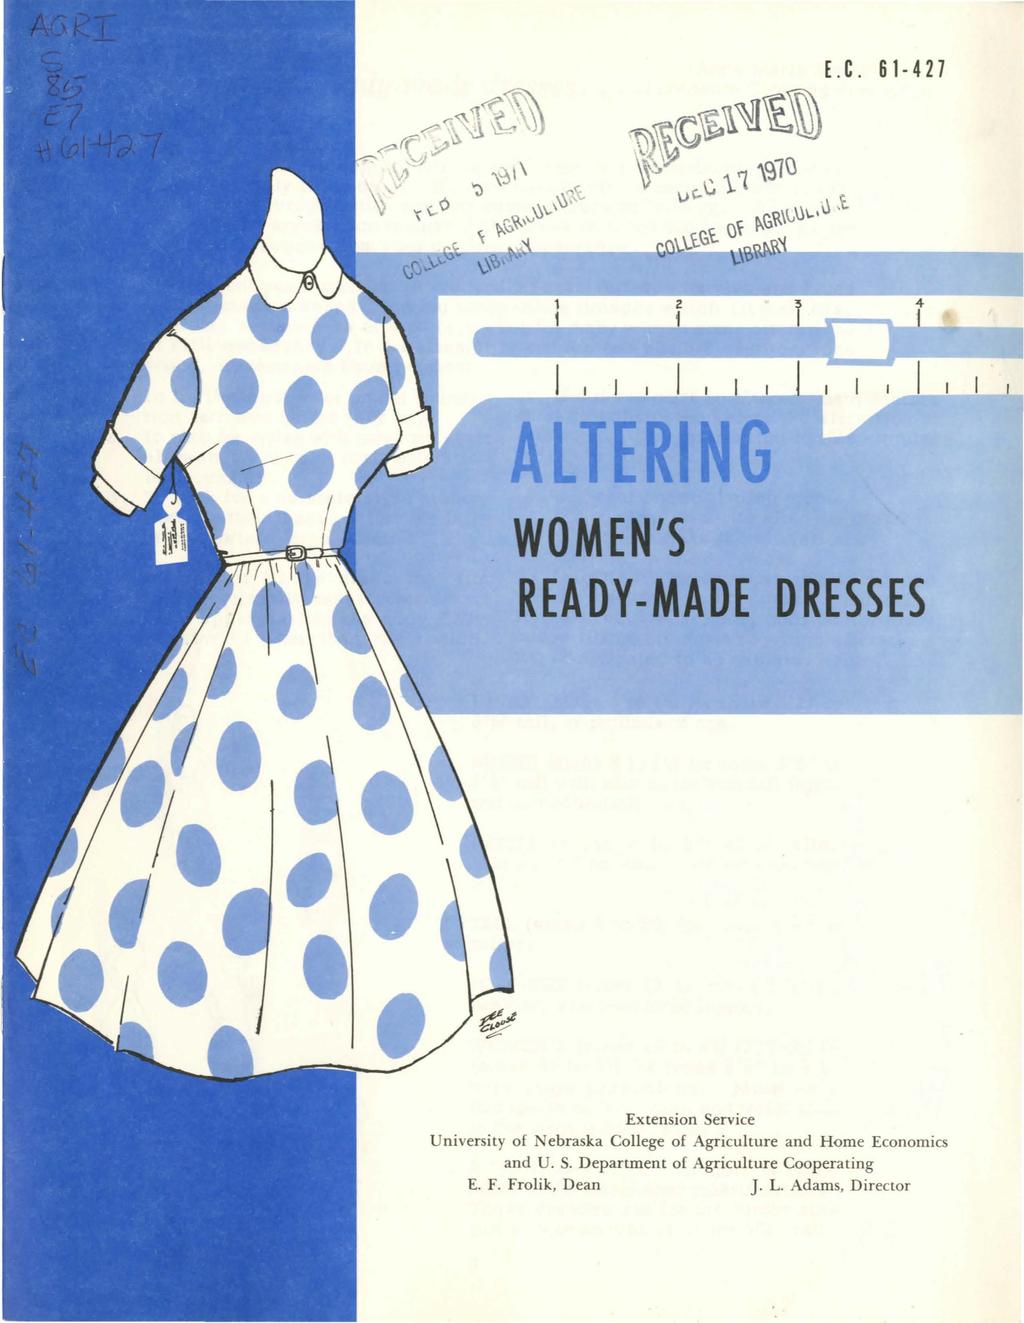 R WOMEN'S READY-MADE DRESSES Extension Service University of Nebraska College of Agriculture and